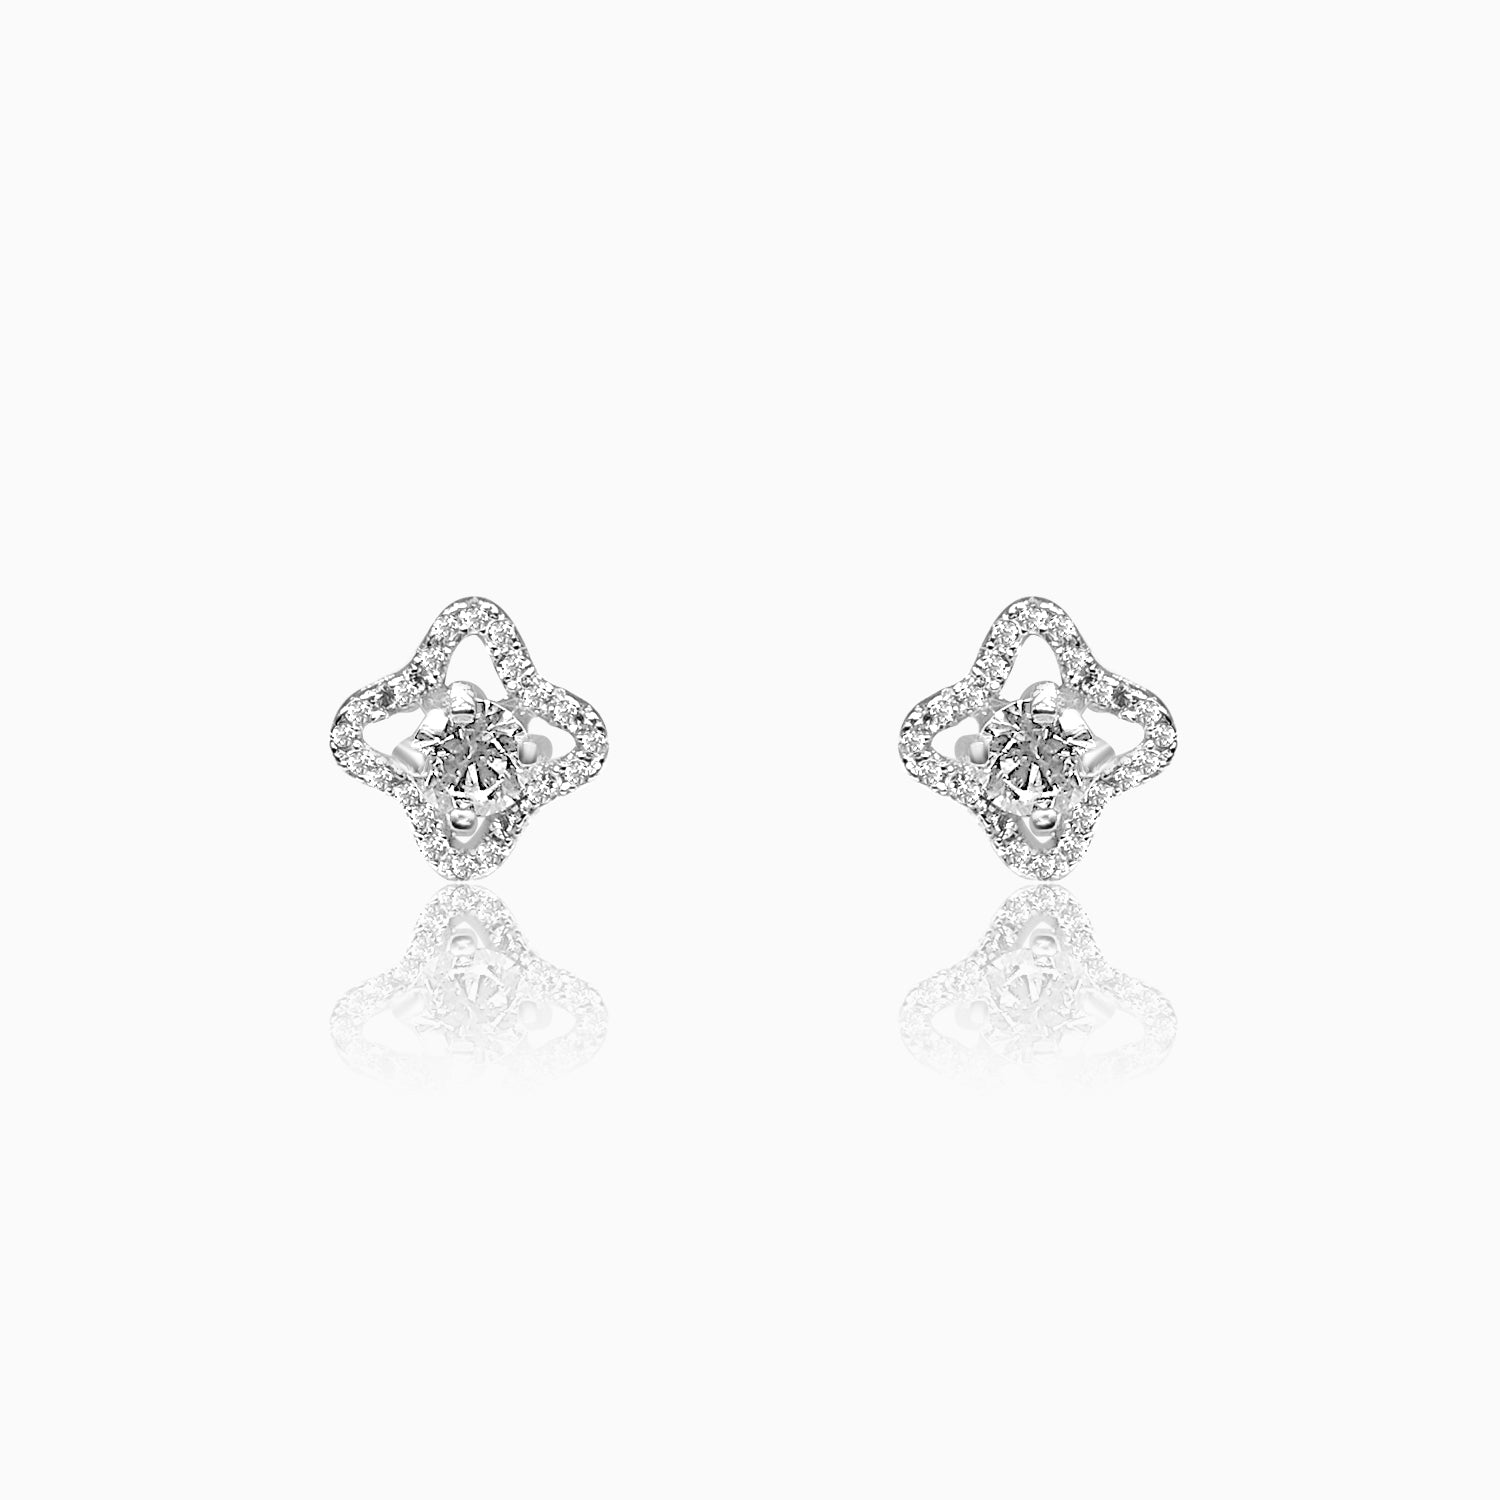 Silver Sparkling Solitaire Stud Earrings